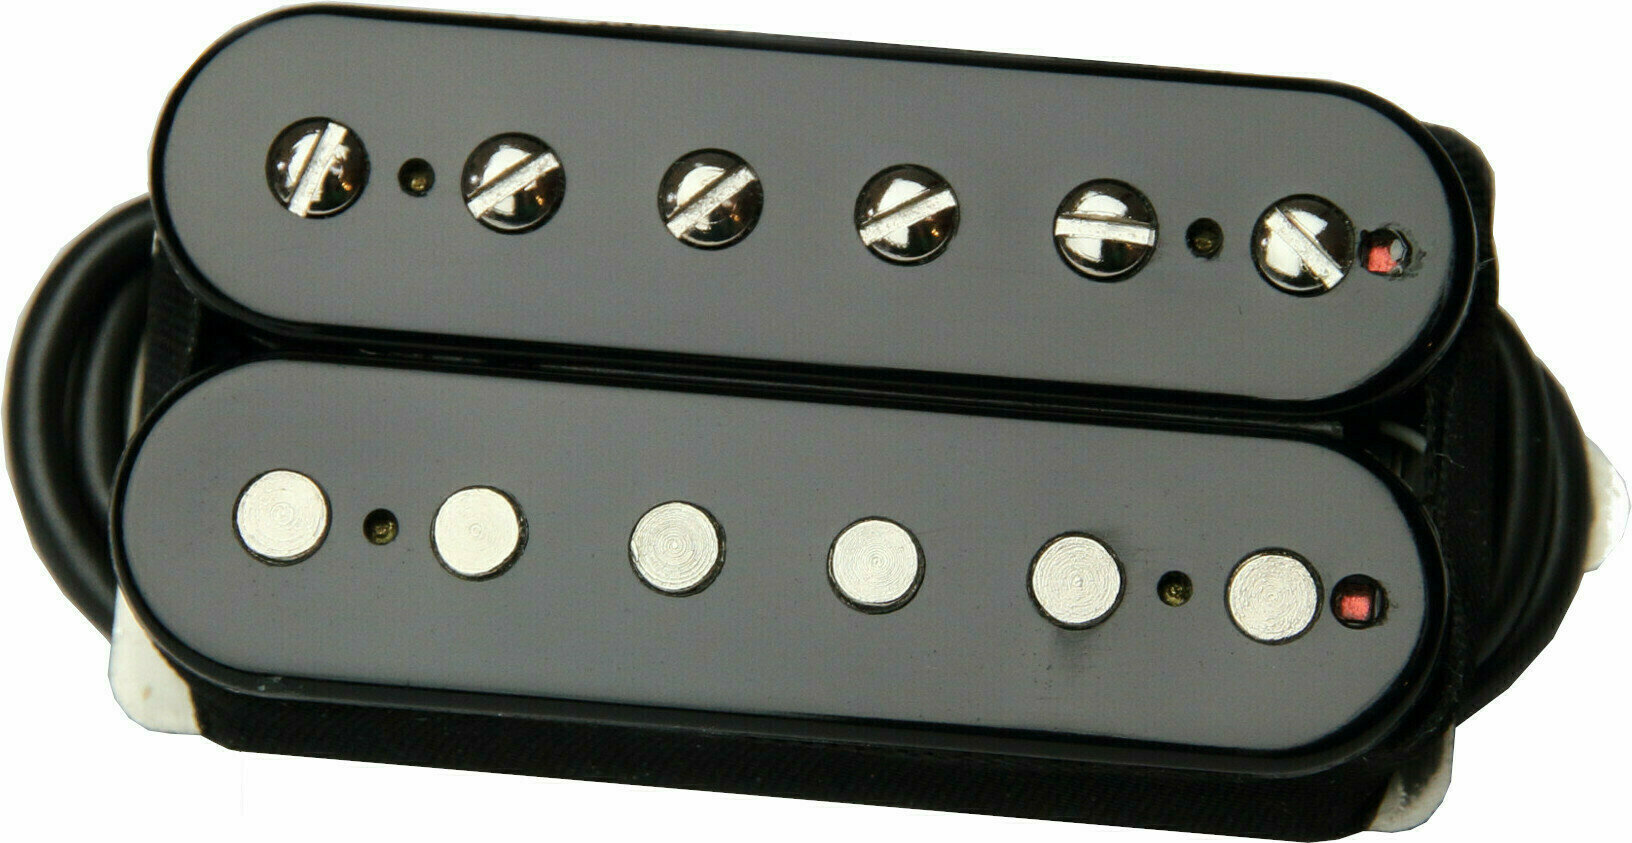 Micro guitare Bare Knuckle Pickups Boot Camp Brute Force Humbucker BBL Noir